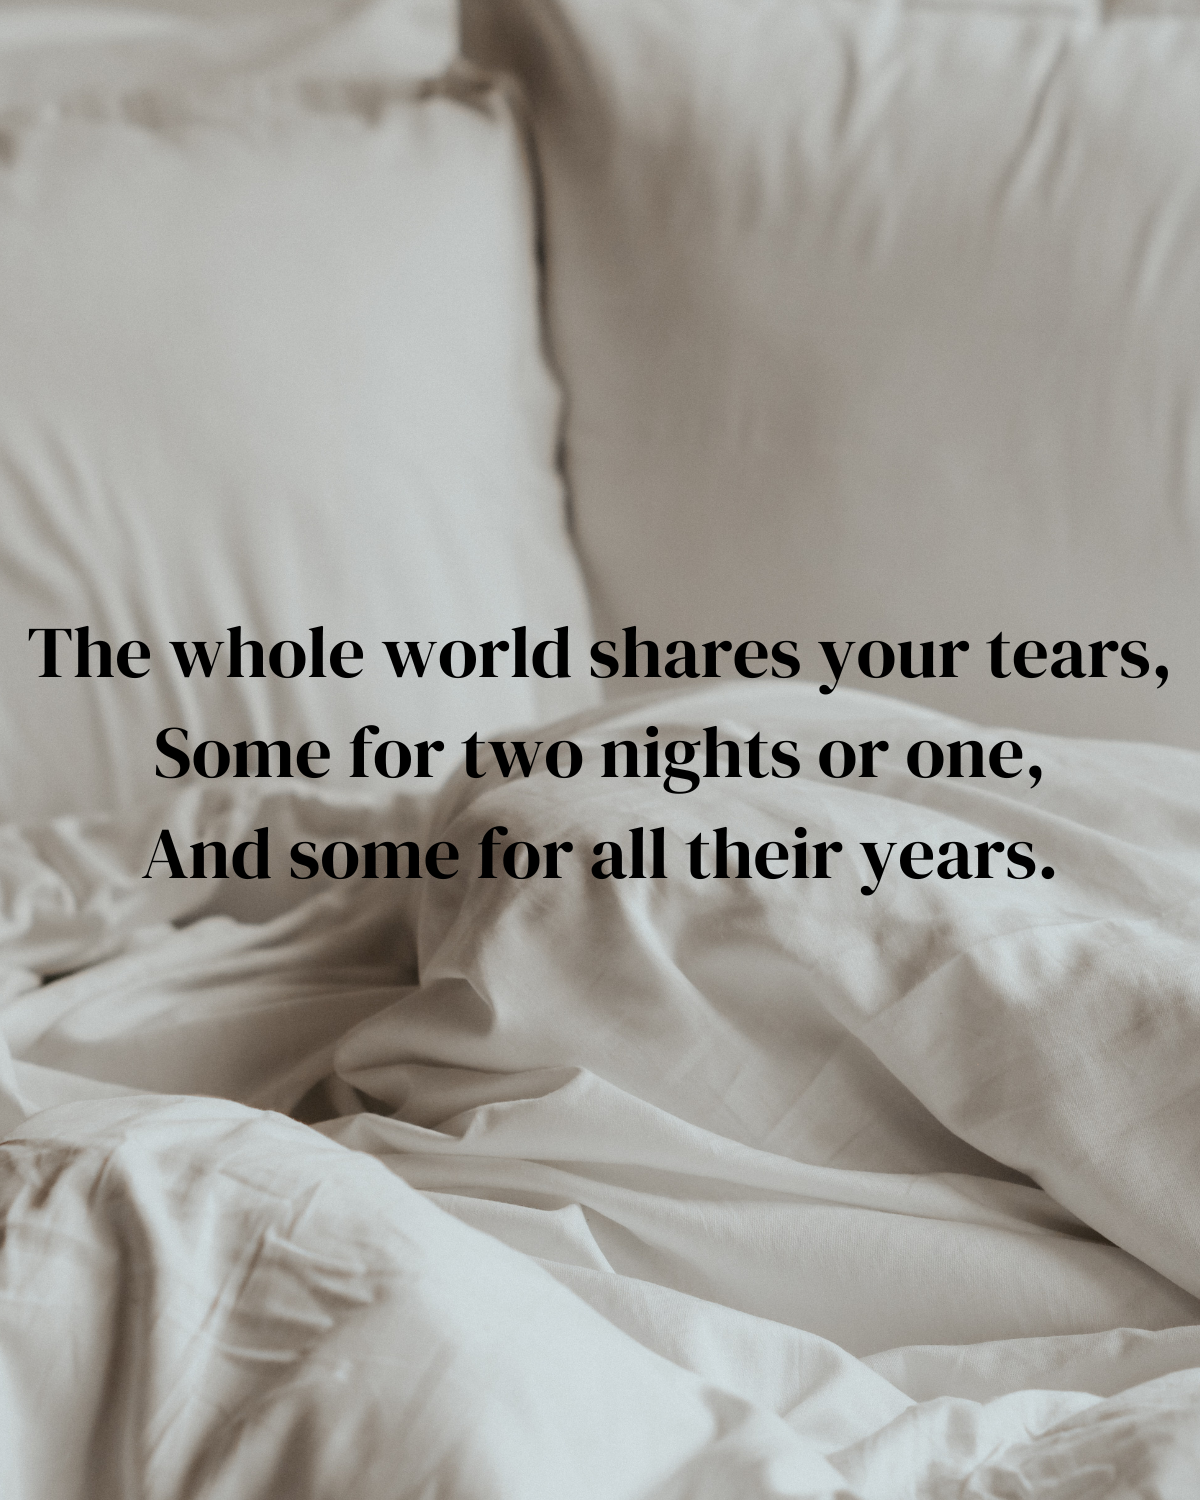 white pillows and bed sheets